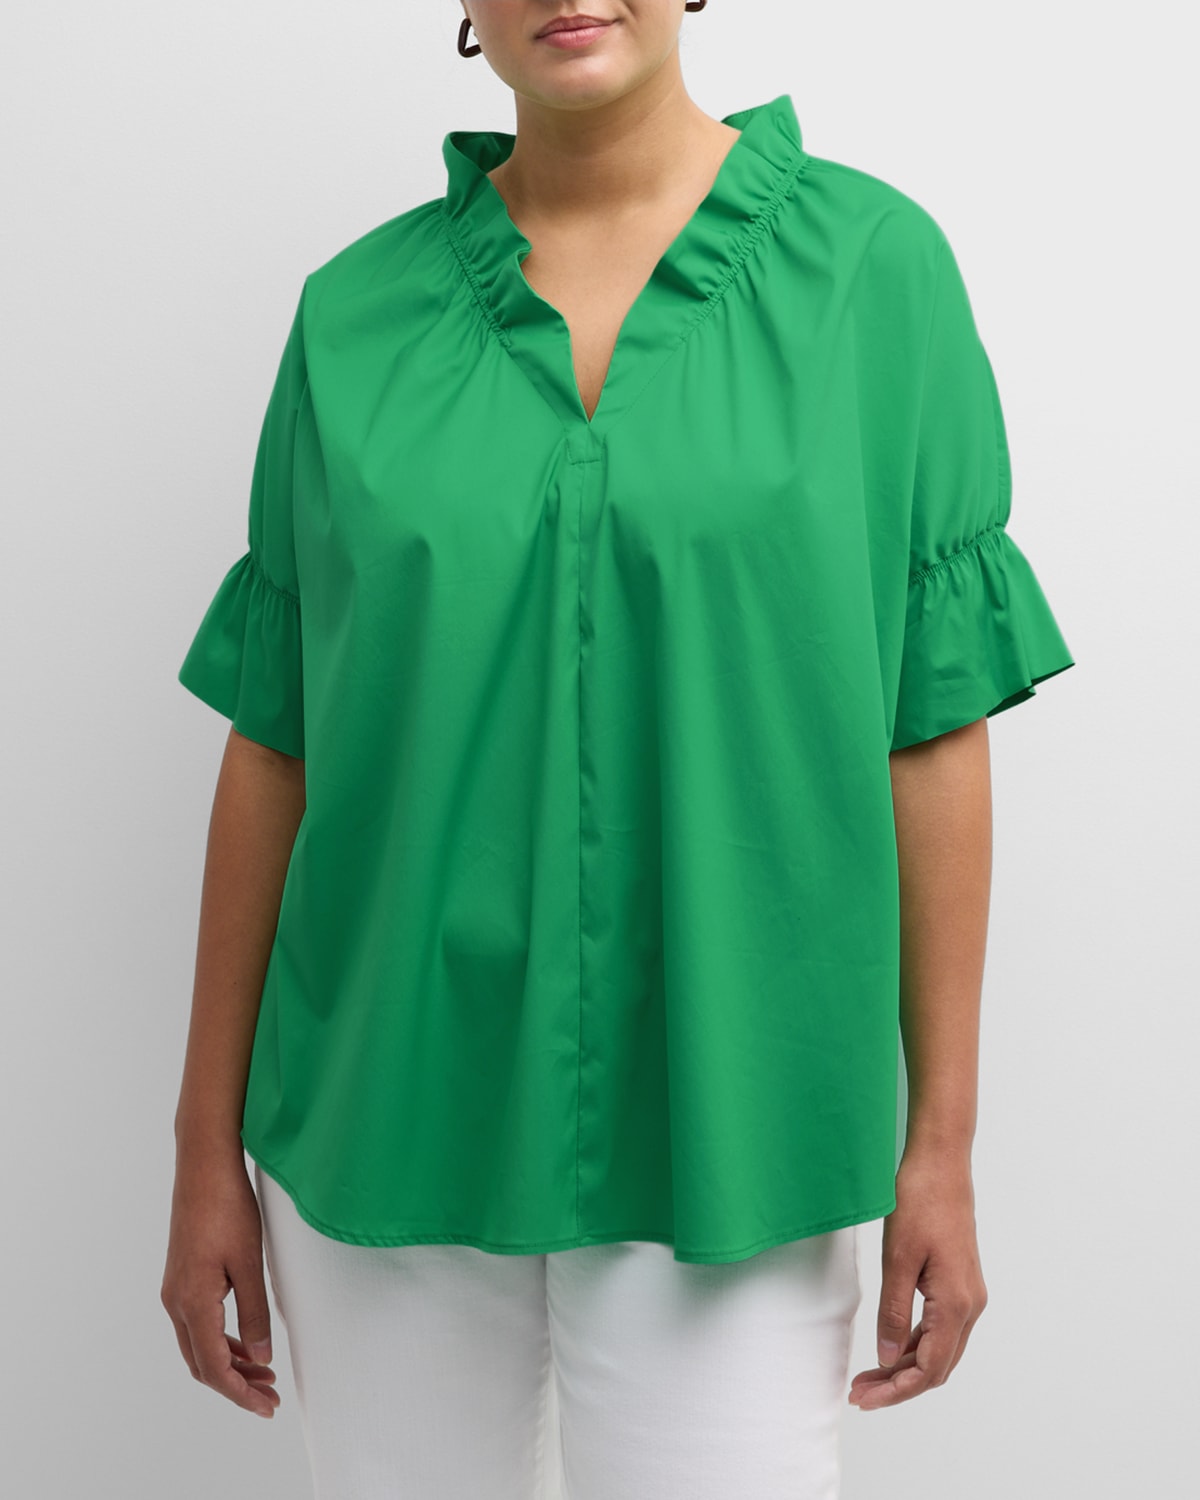 Finley Plus Size Crosby Solid Ruffle Shirt In Green